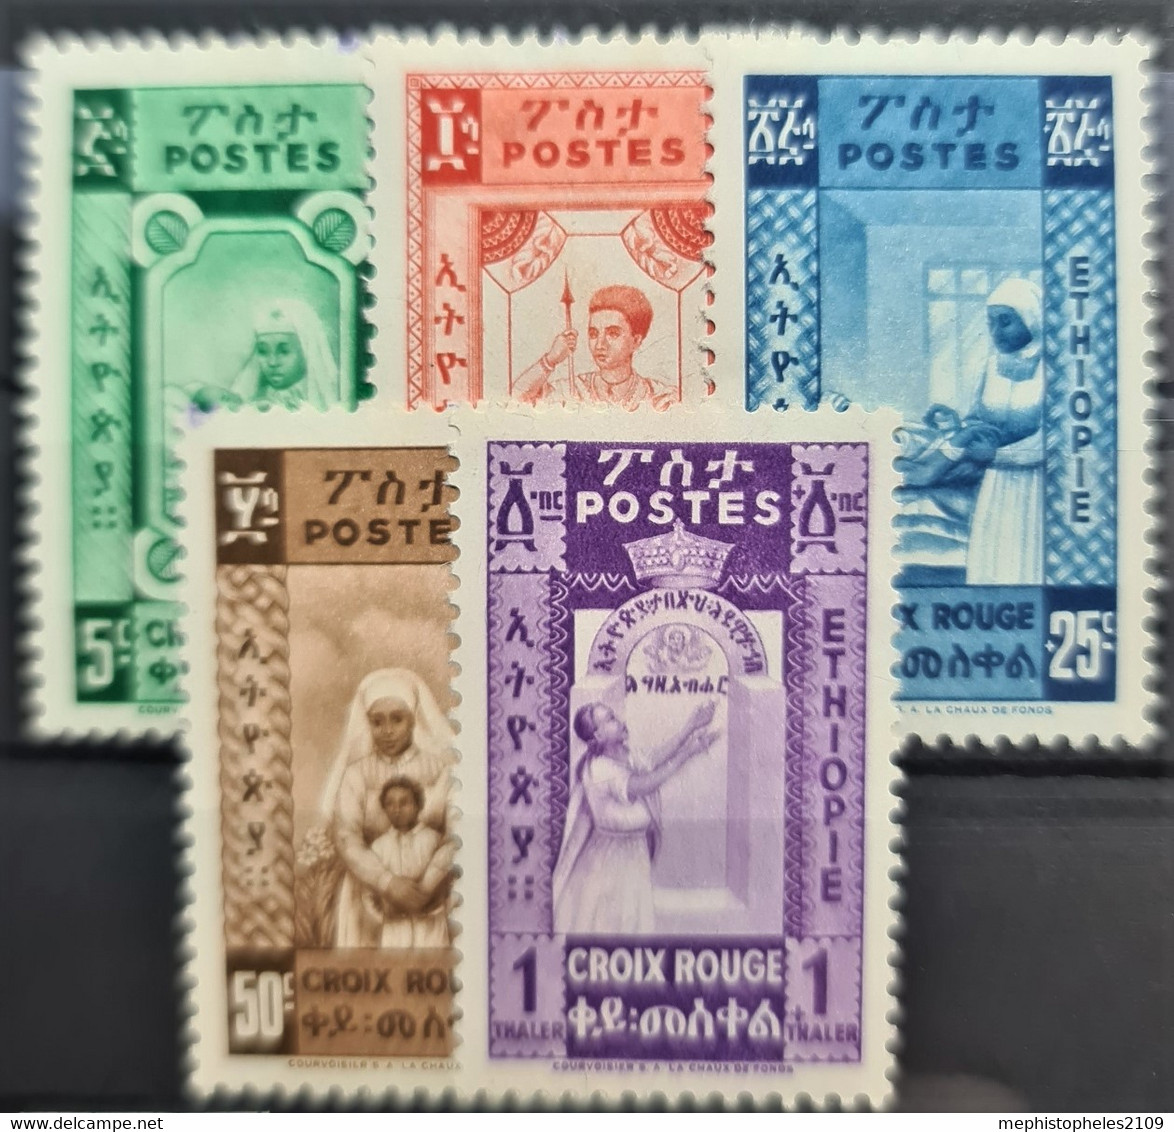 ETHIOPIA 1936 - MLH - Red Cross Not Issued - Complete Set! - Ethiopia